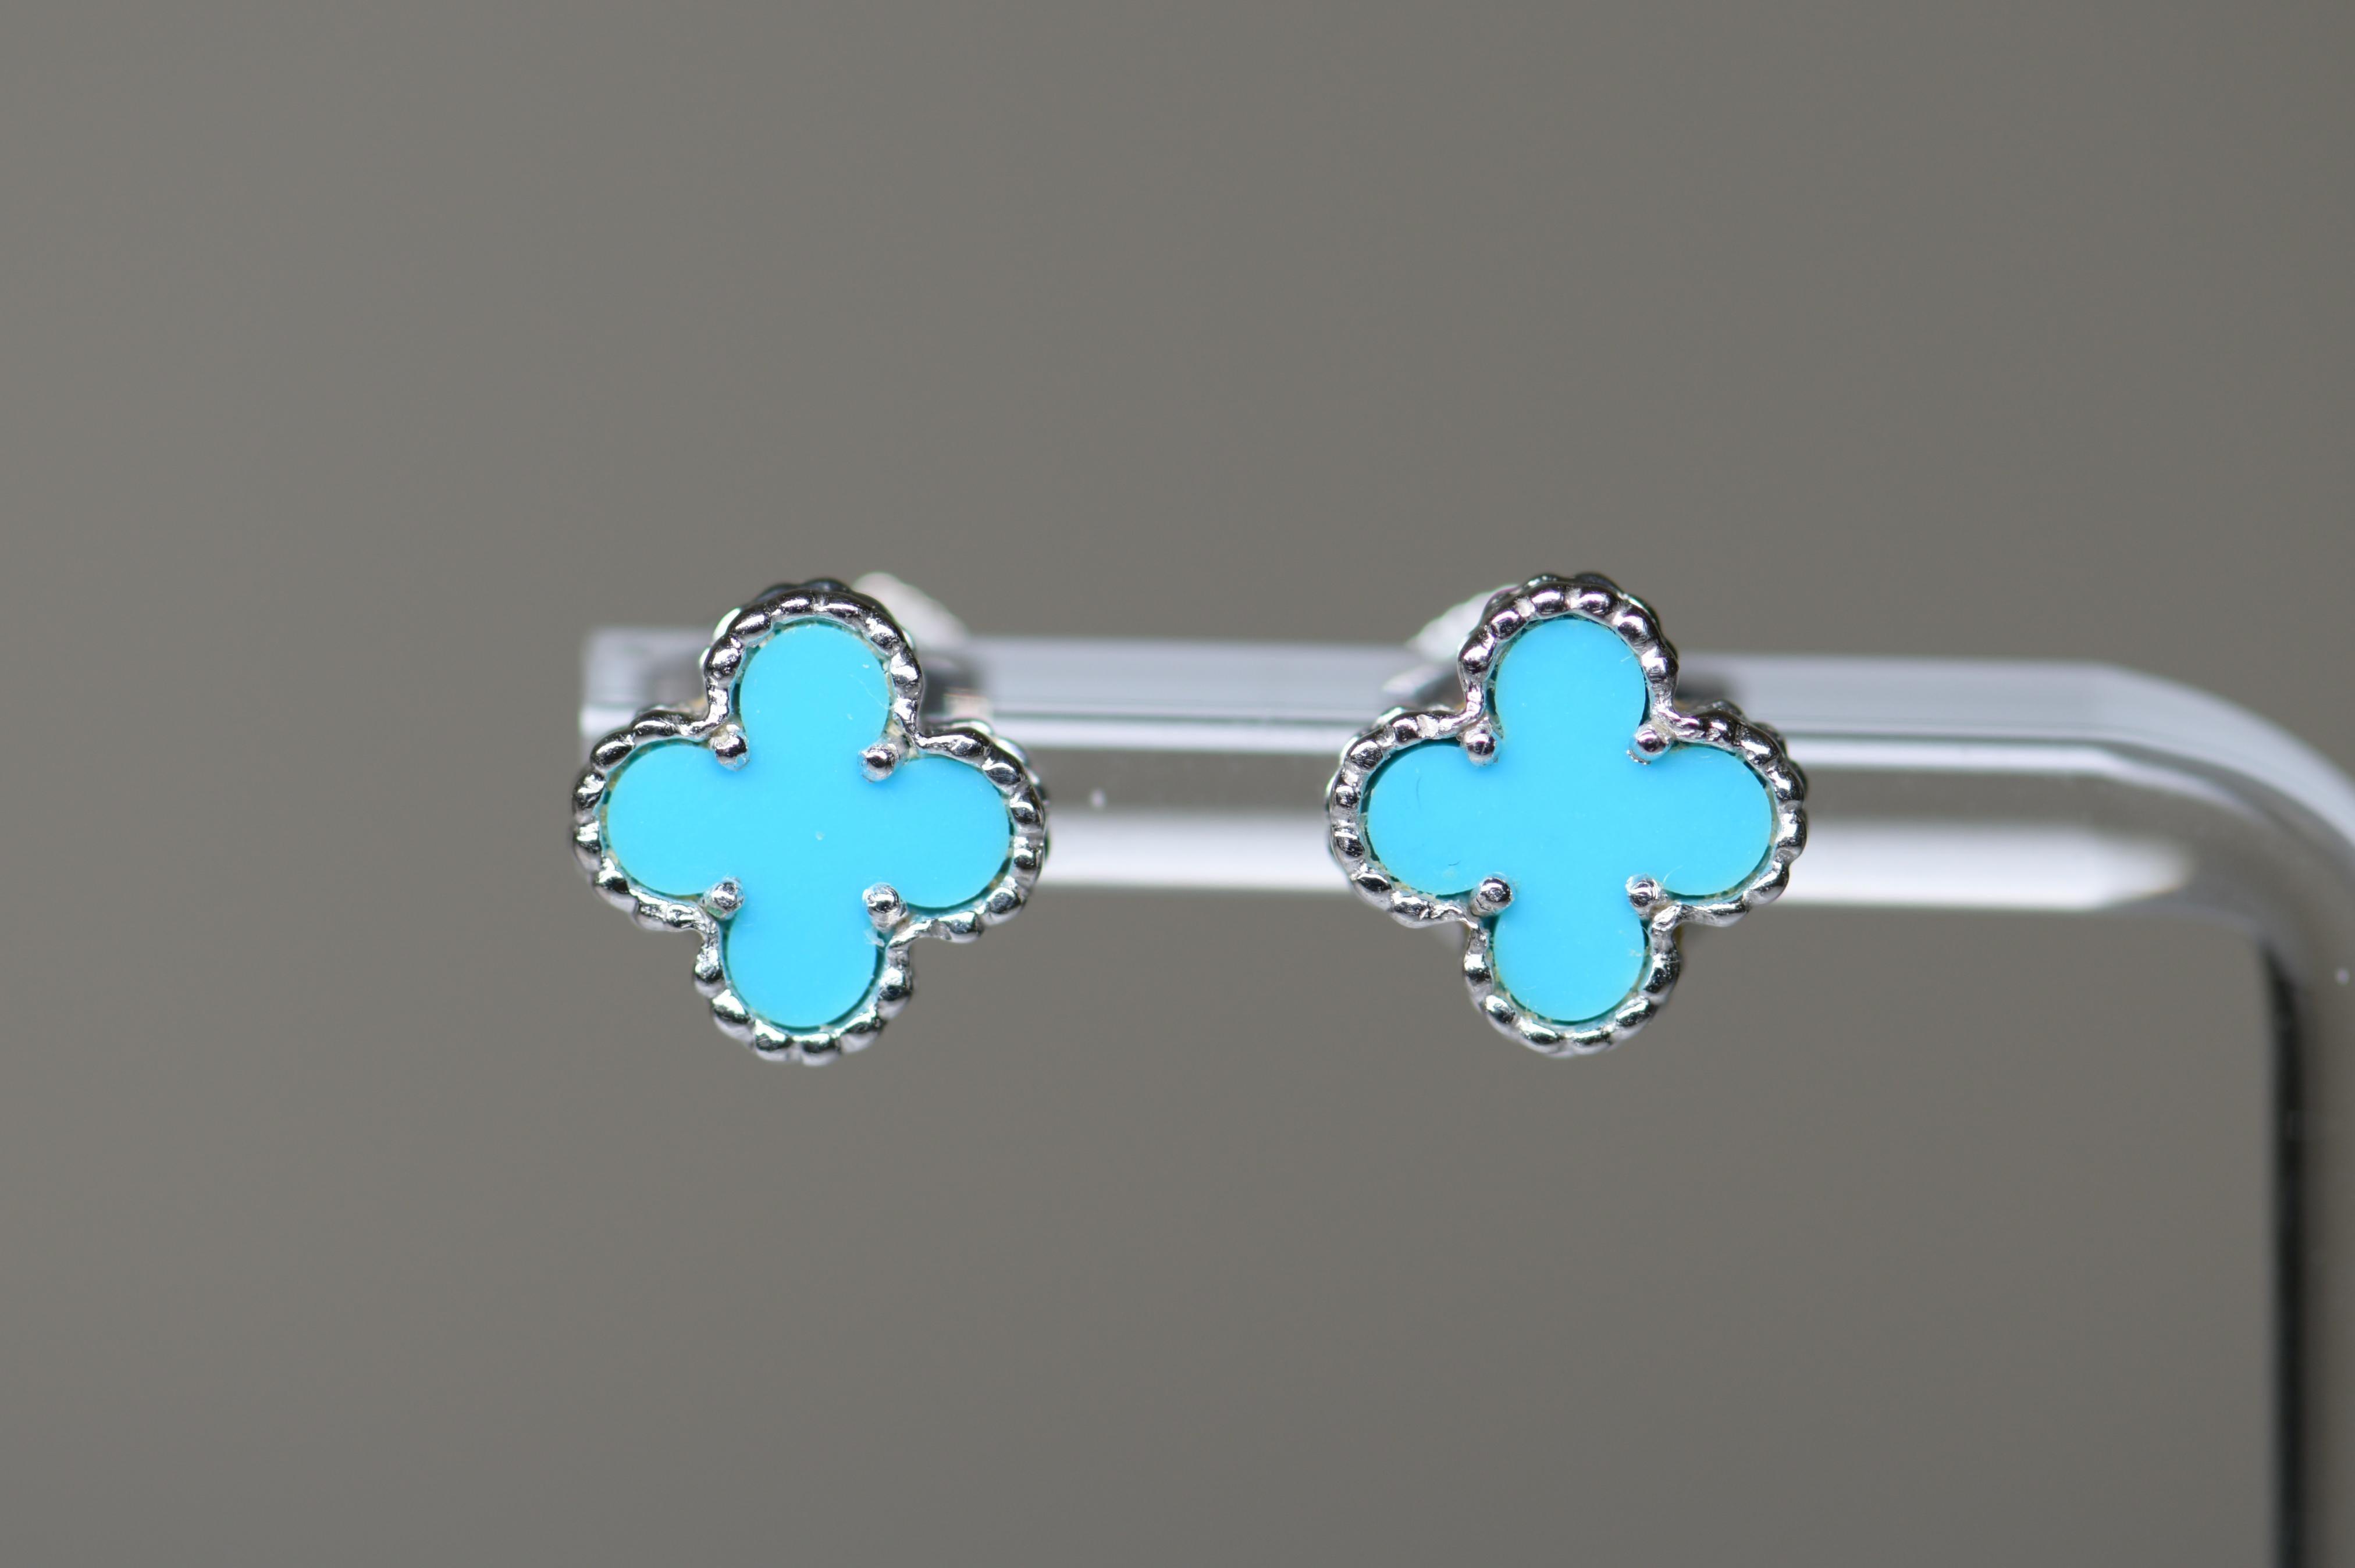 Van Cleef & Arpels sweet turquoise Alhambra 18K white gold earstuds. It is a very rare piece, you won't find this come to the market very easy. Truly a rare collecting piece. This lovely piece comes with an original pouch and original box. 

Van